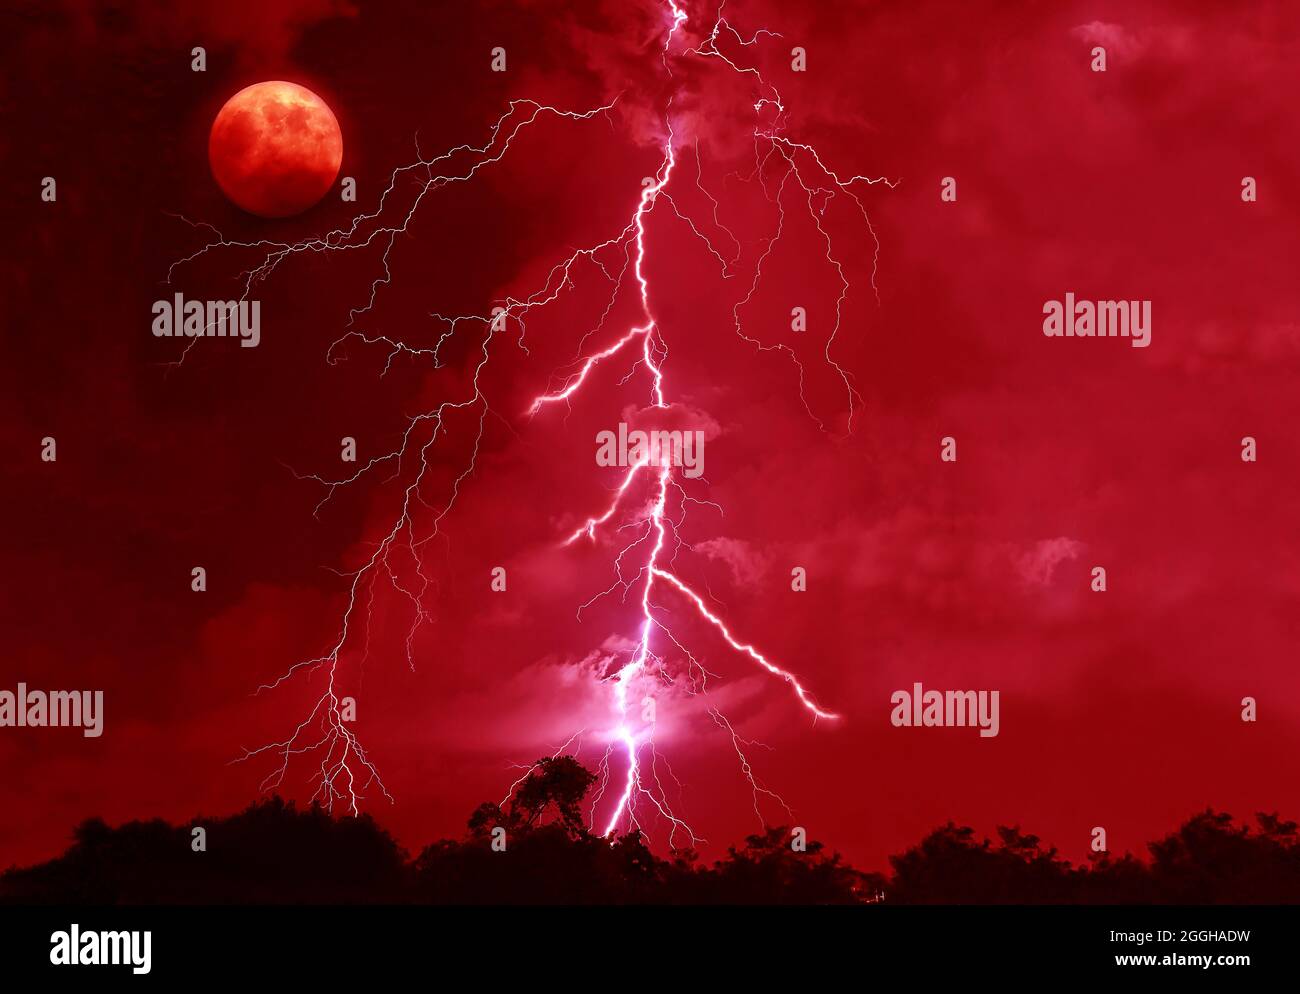 Surreal Pop Art Style Powerful Lightning Strikes in the Bloody Red Night Sky with a Spooky Full Moon Stock Photo